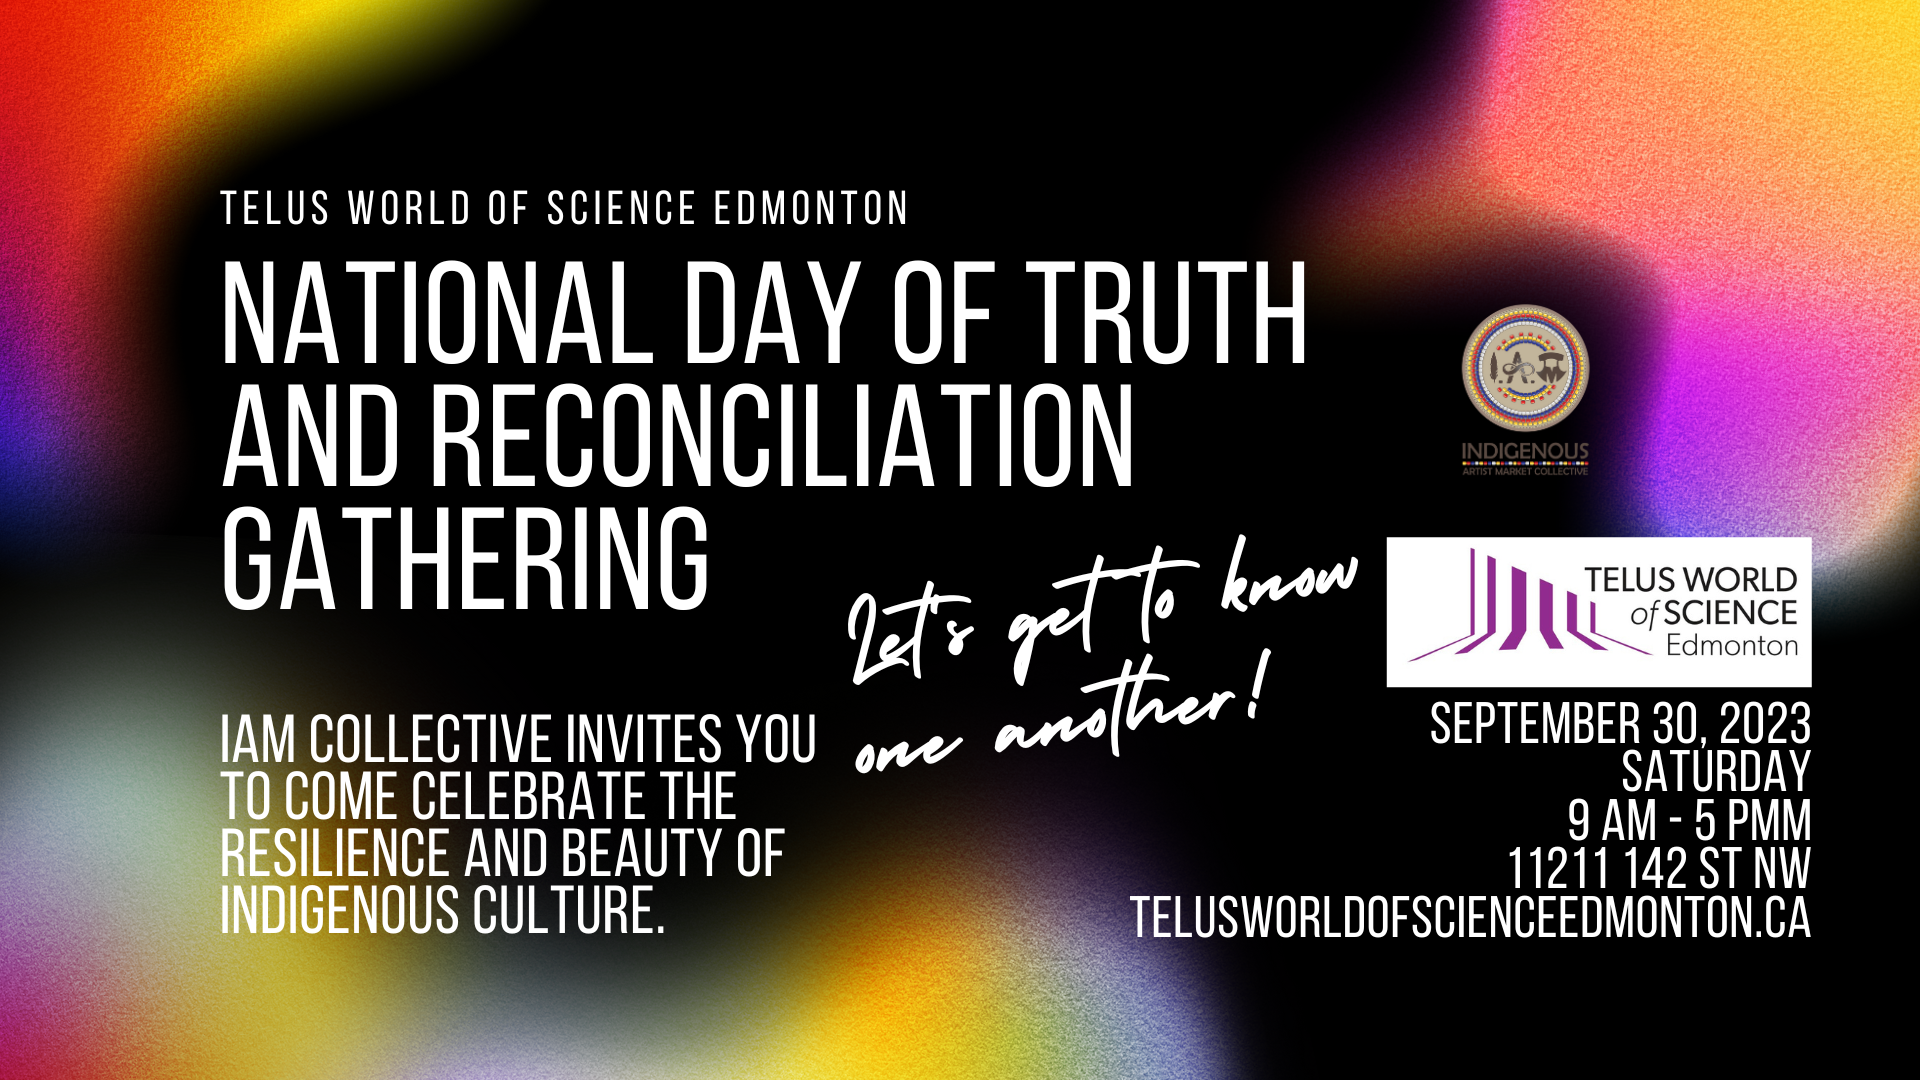 Featured image for “A National Day for Truth and Reconciliation Gathering at TELUS WORLD OF SCIENCE Edmonton”